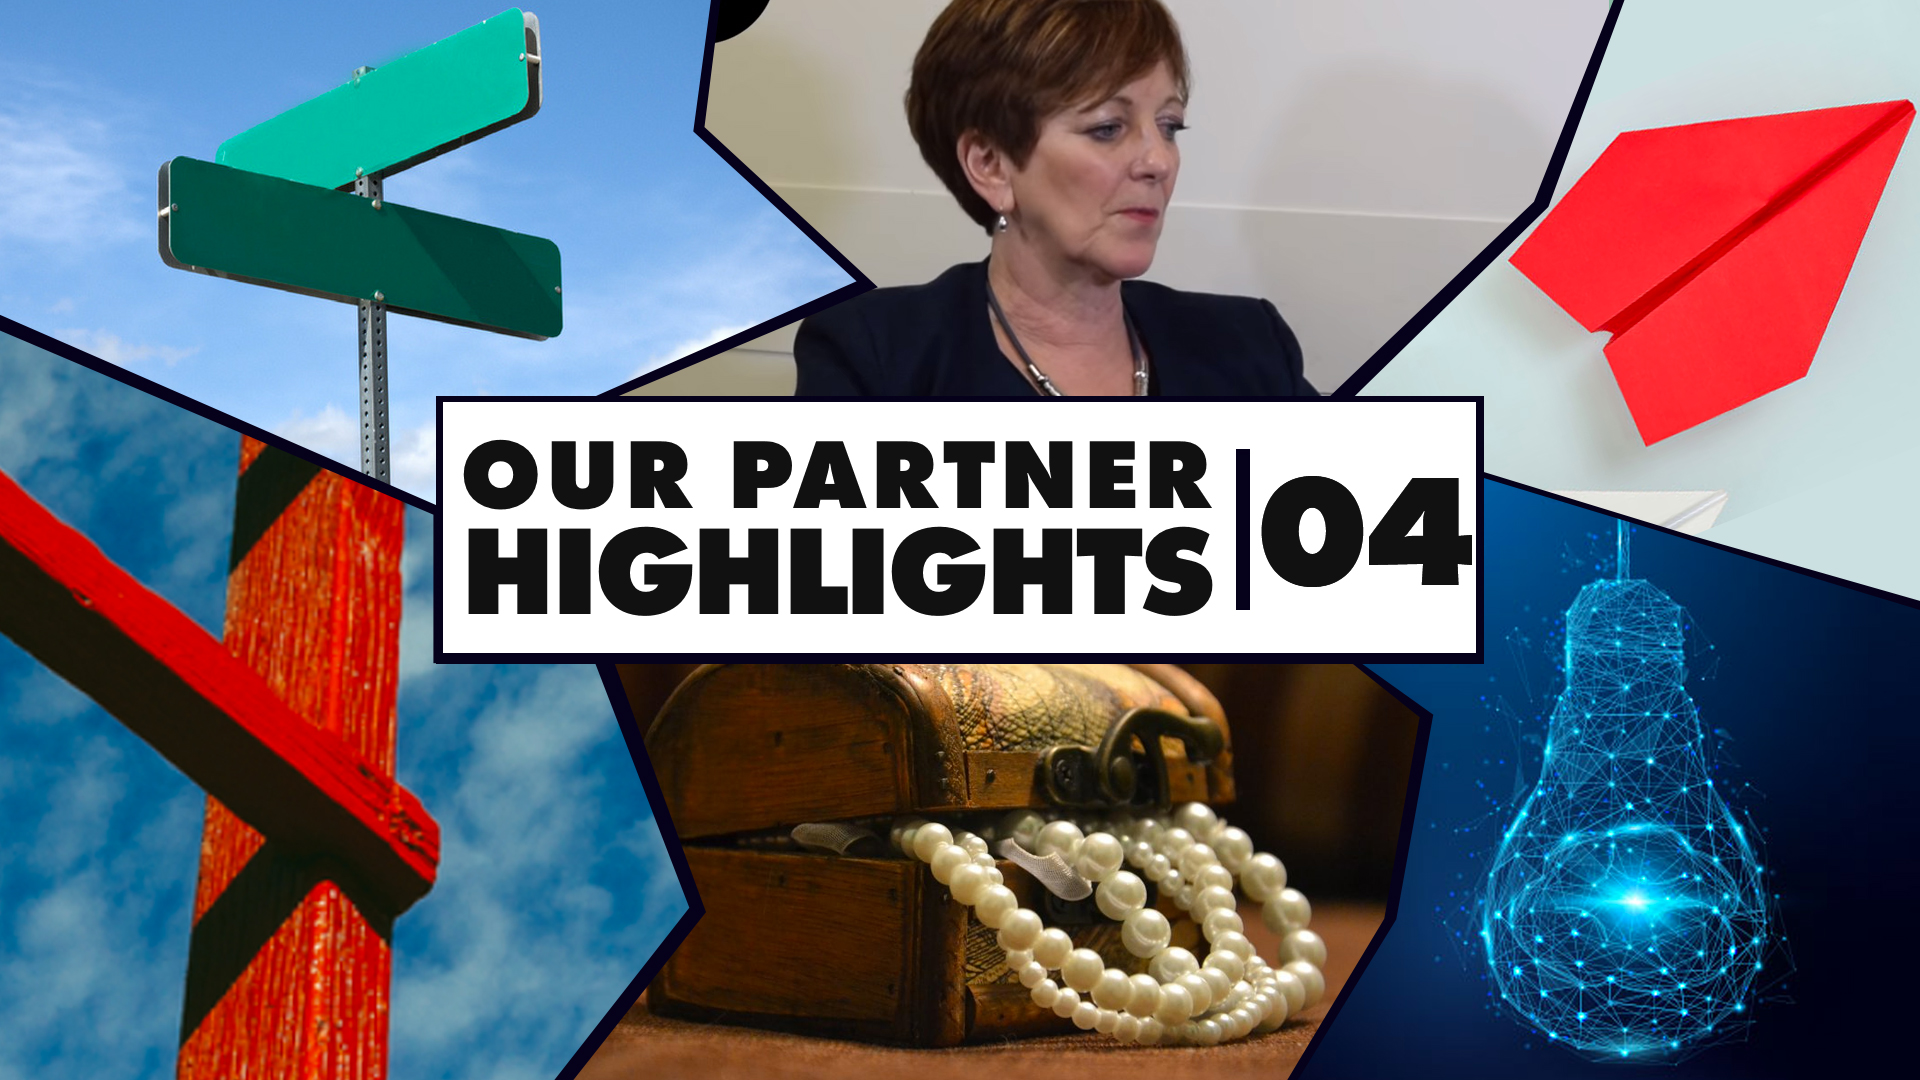 Our Partner Highlights | 04